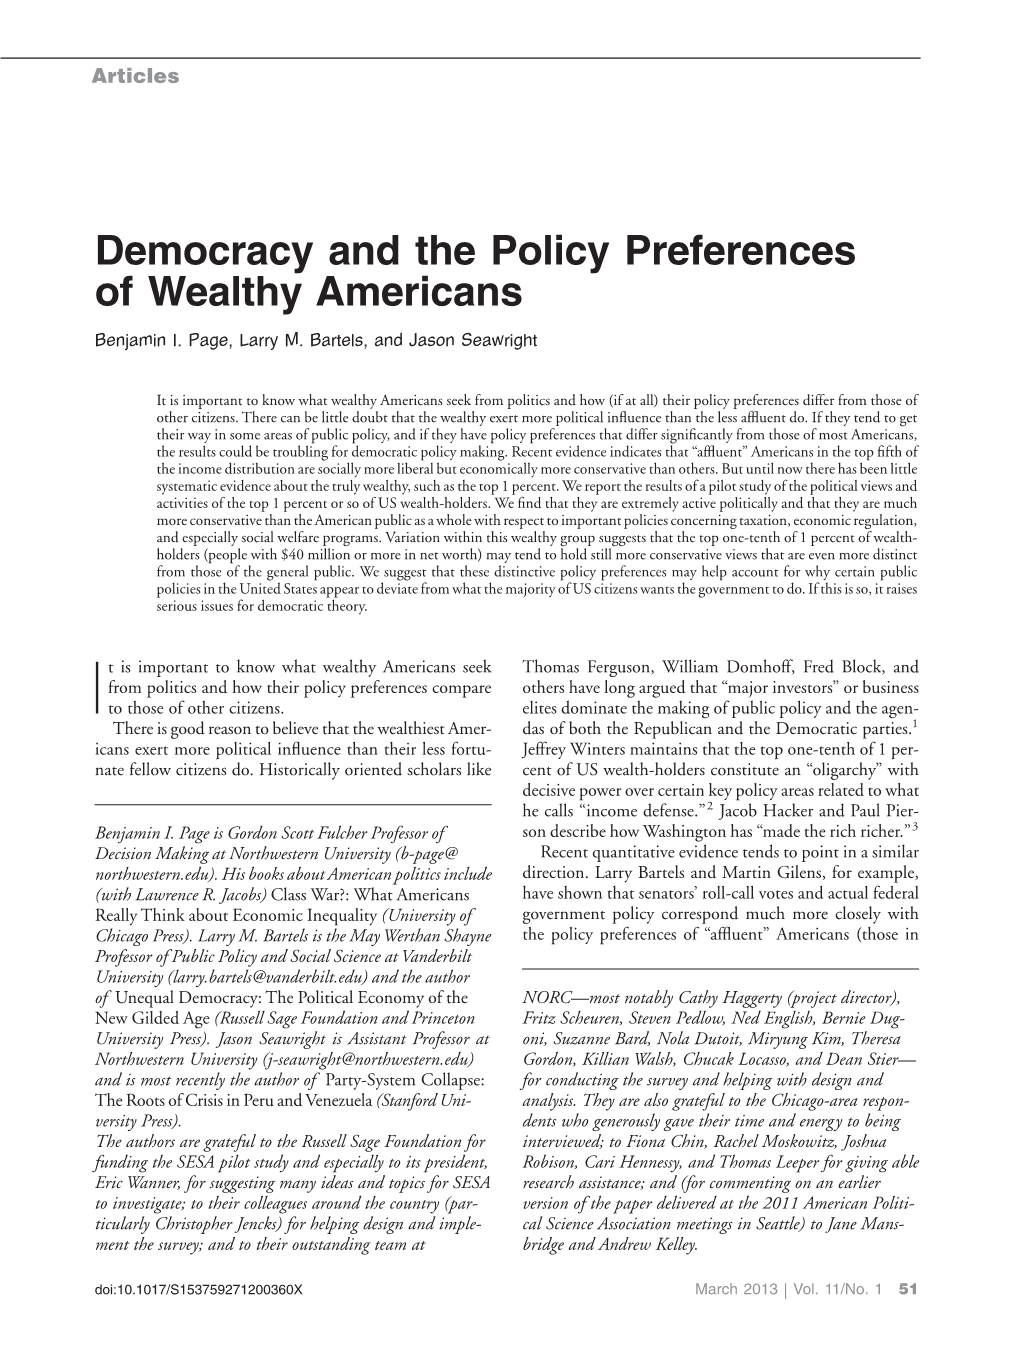 Democracy and the Policy Preferences of Wealthy Americans